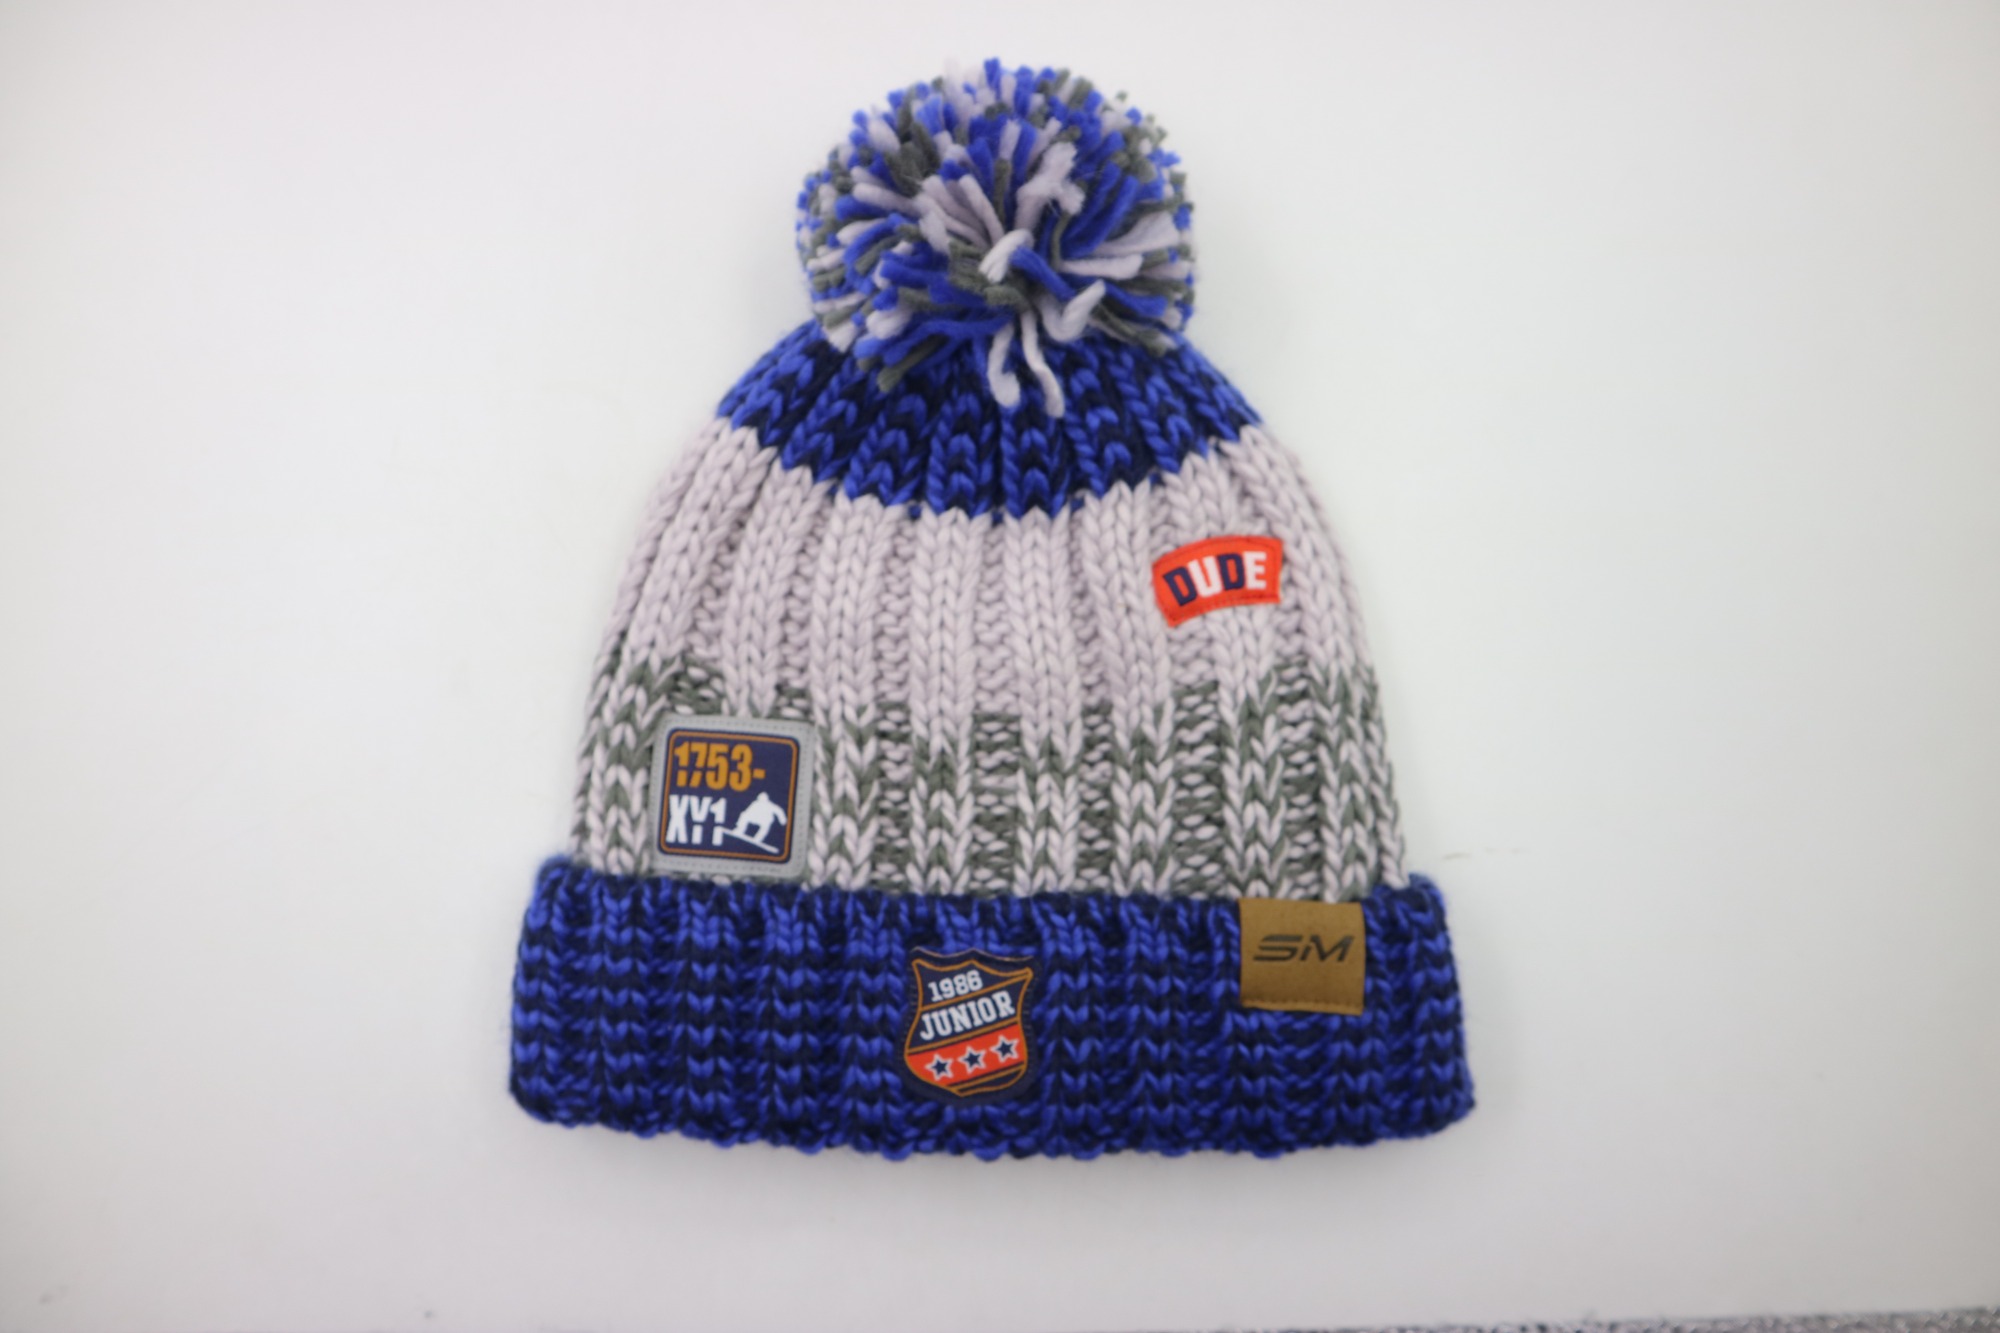 Brillent Ribbed Knit Pom Pom Winter Beanies Embroidery Hat with Patches All Over the Hat | Sewingman